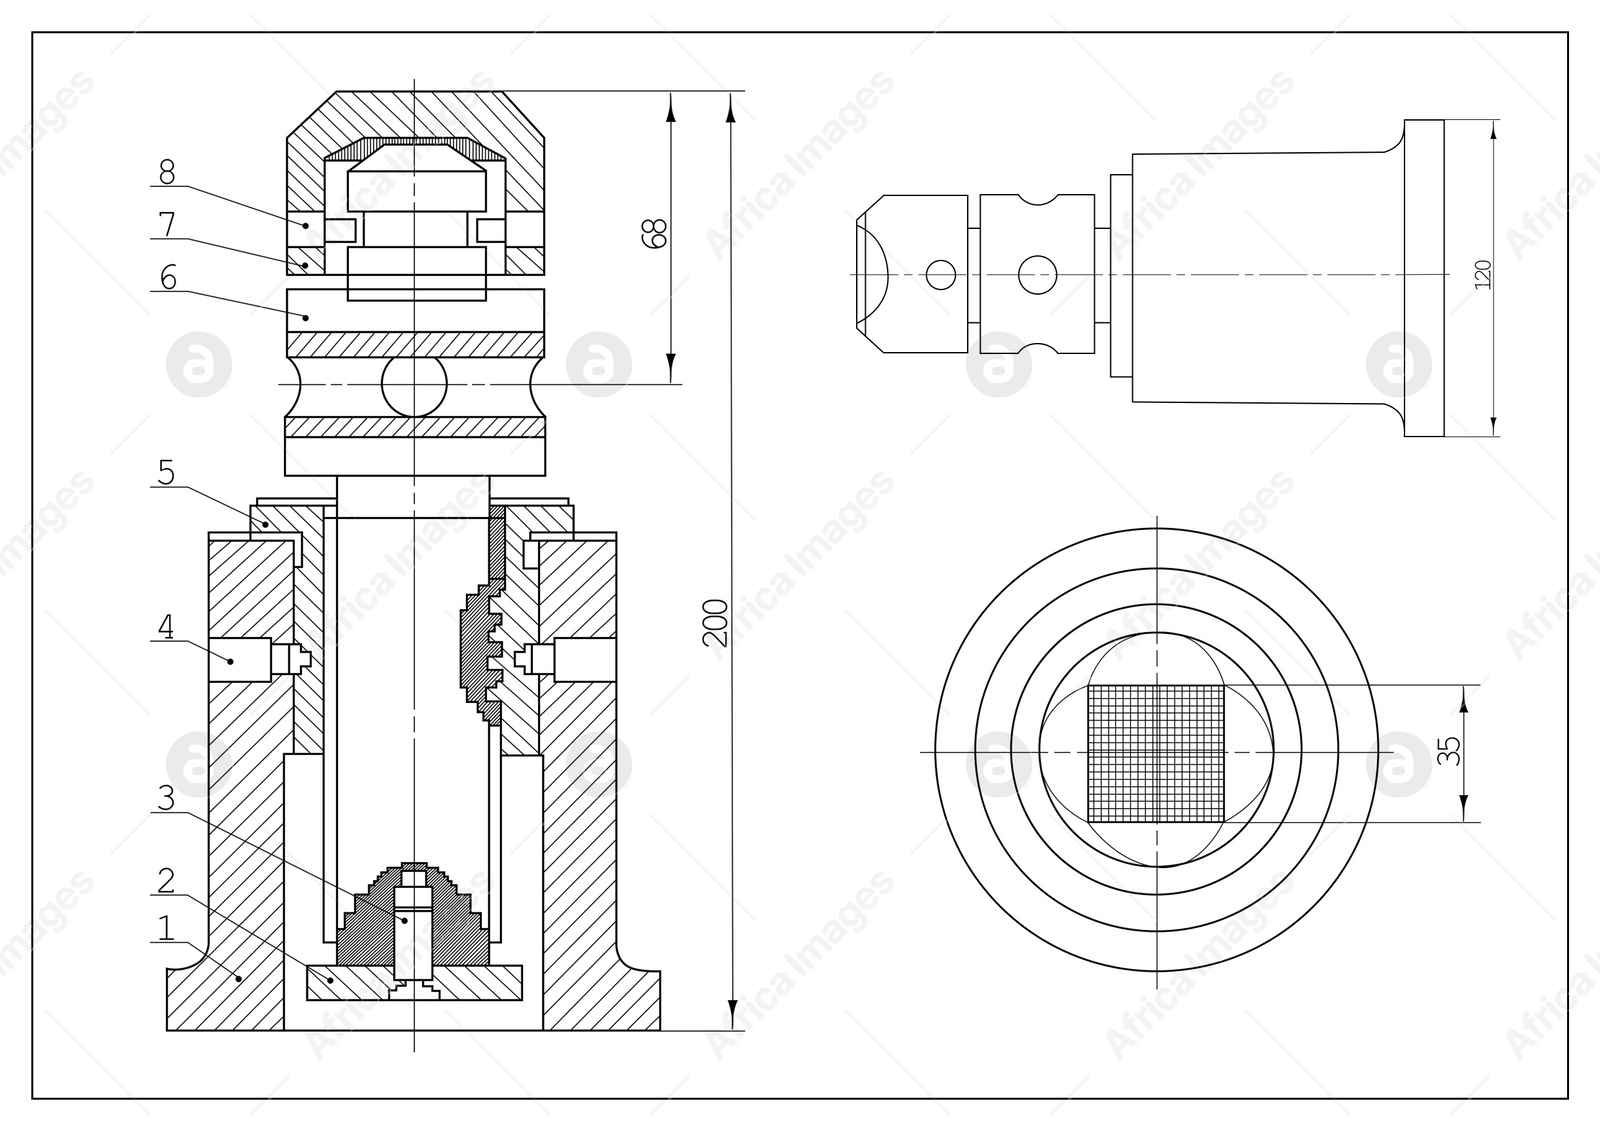 Image of Technical drawing as background. Plan of mechanism